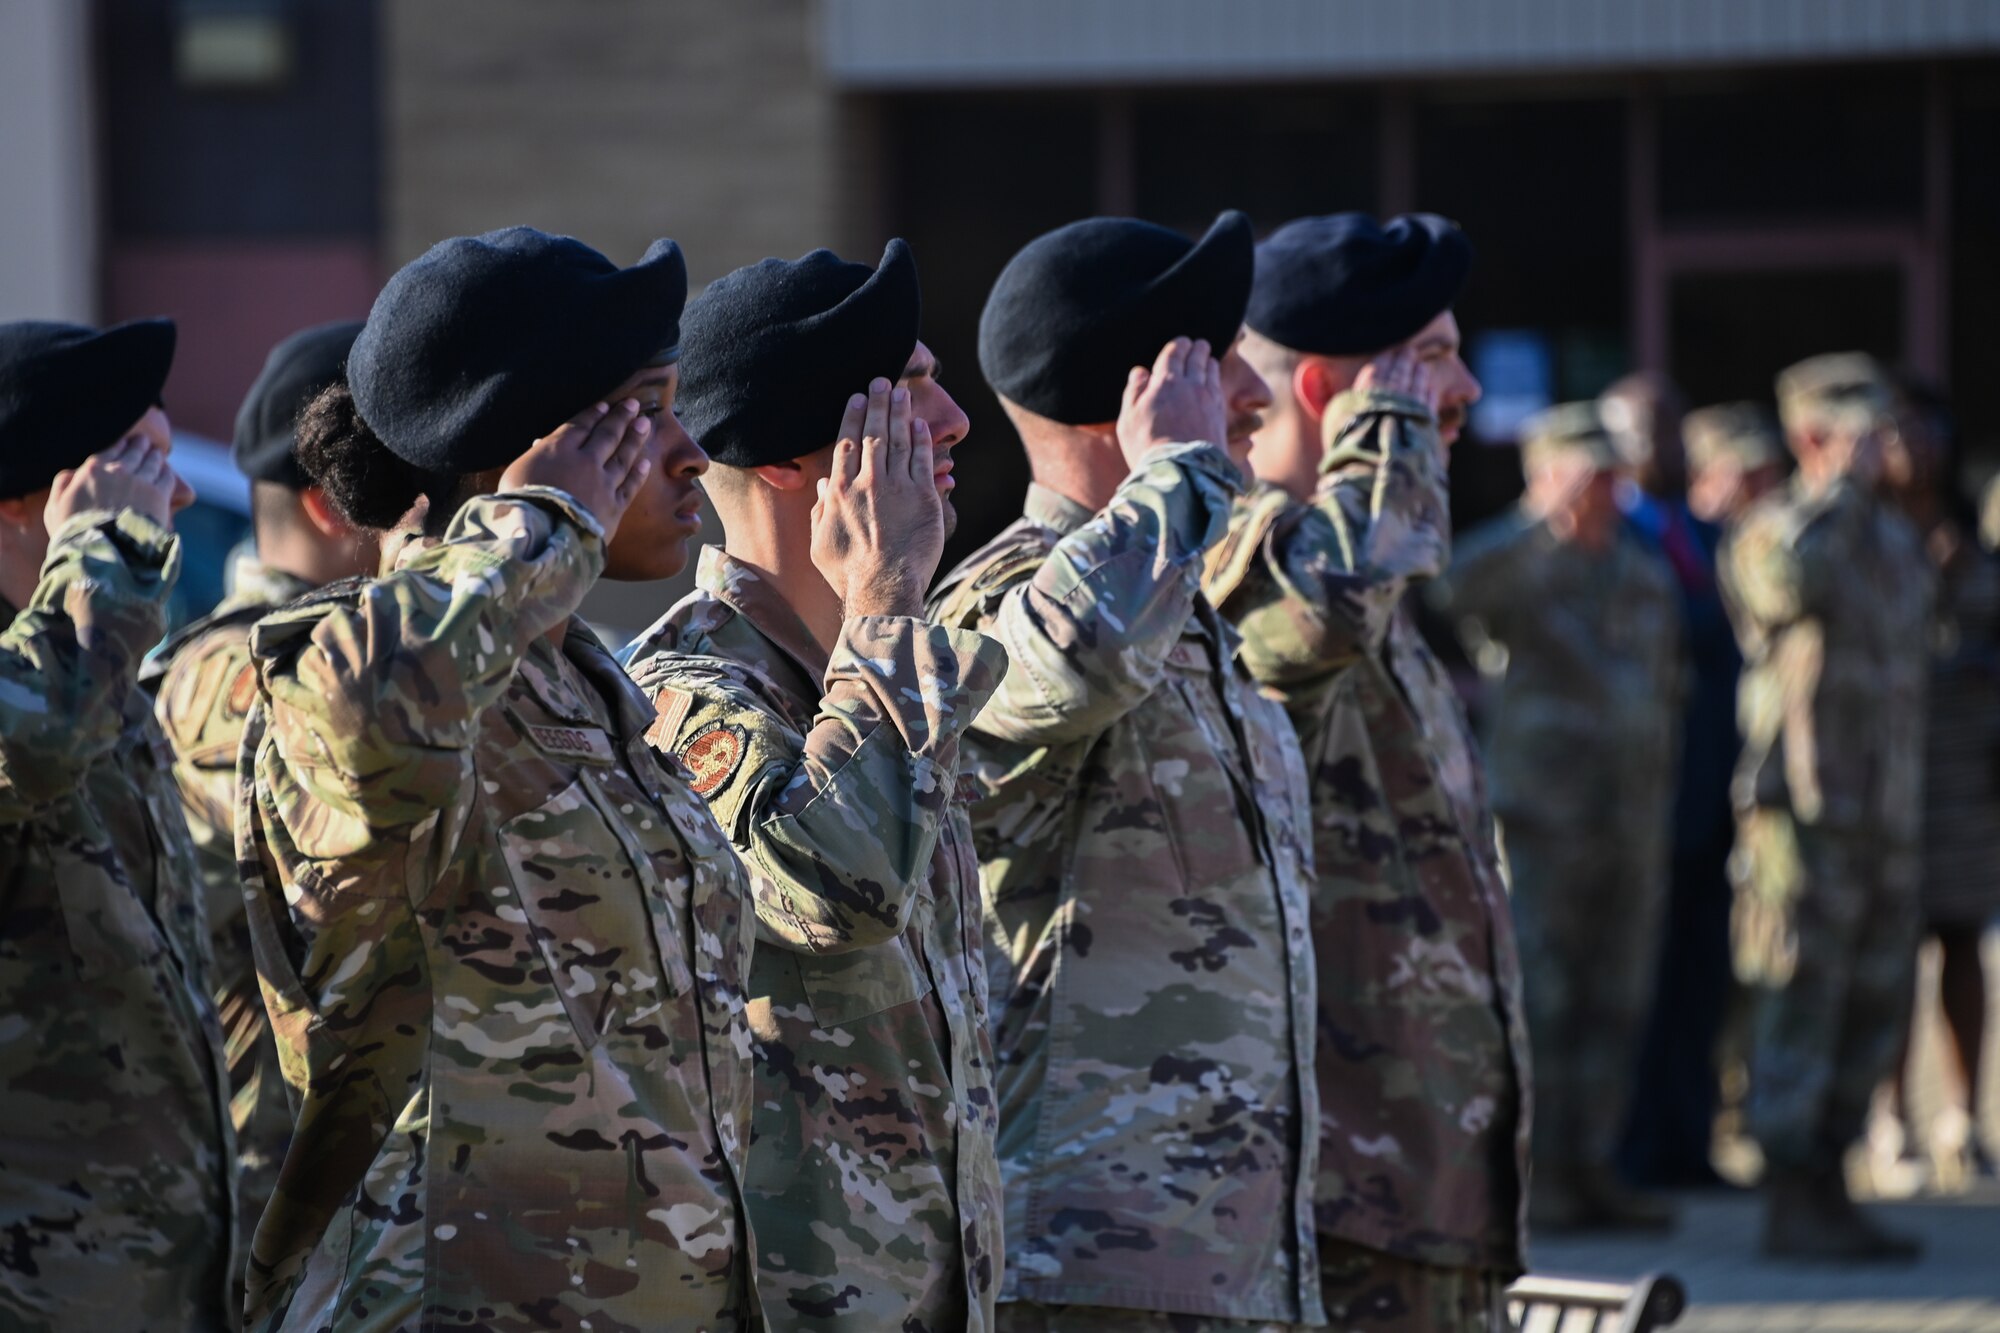 Security Forces Airmen salute while Taps plays during a 9/11 remembrance ceremony at Joint Base Andrews, Md., Sept. 9, 2022.  A member of the Air Force Band played Taps to honor those who lost their lives in the Sept. 11, 2001 terrorist attacks. (U.S. Air Force photo by Airman 1st Class Isabelle Churchill)